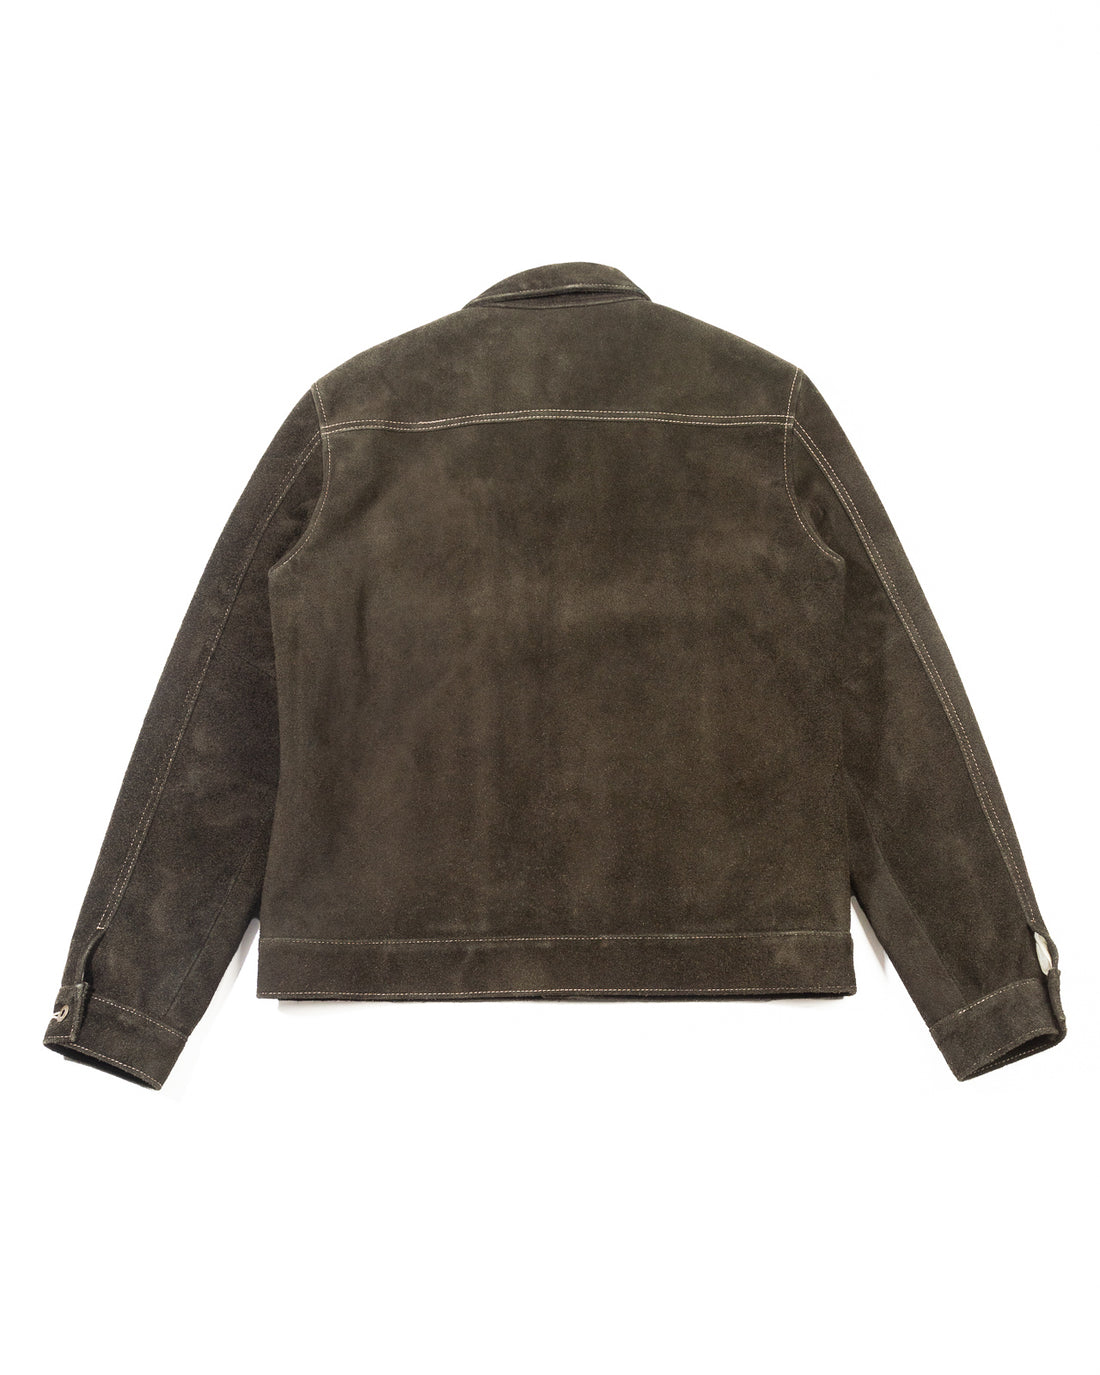 Y'2 Leather Steer Suede 1st Type Jacket - 25th Anniversary Limited - Olive (TB-140-25SP) - Standard & Strange